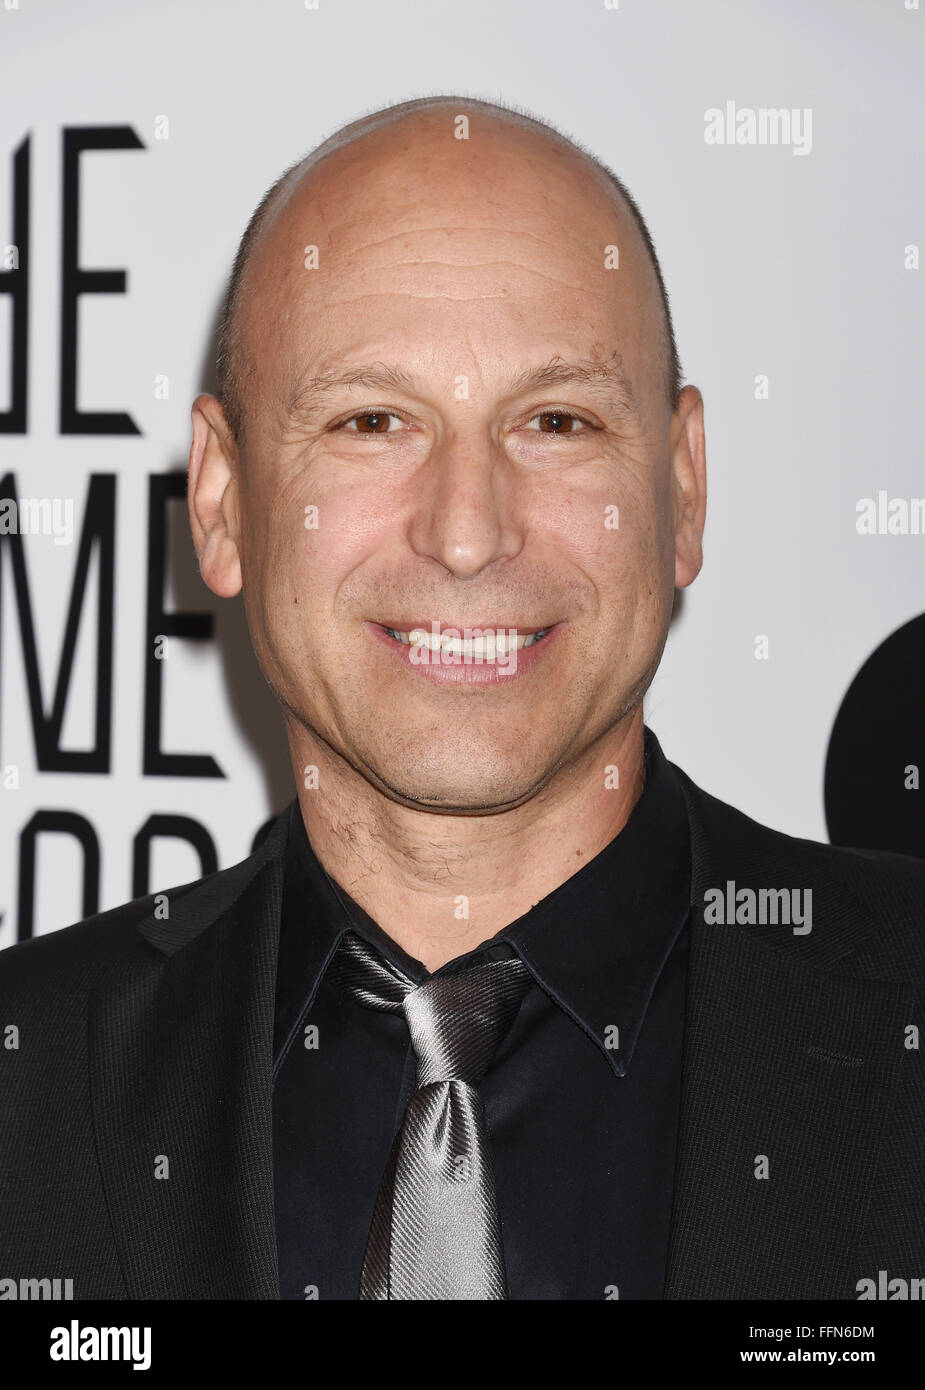 Composer Inon Zur arrives at The Game Awards 2015 / Arrivals at Microsoft Theater on December 3, 2015 in Los Angeles, California., Stock Photo